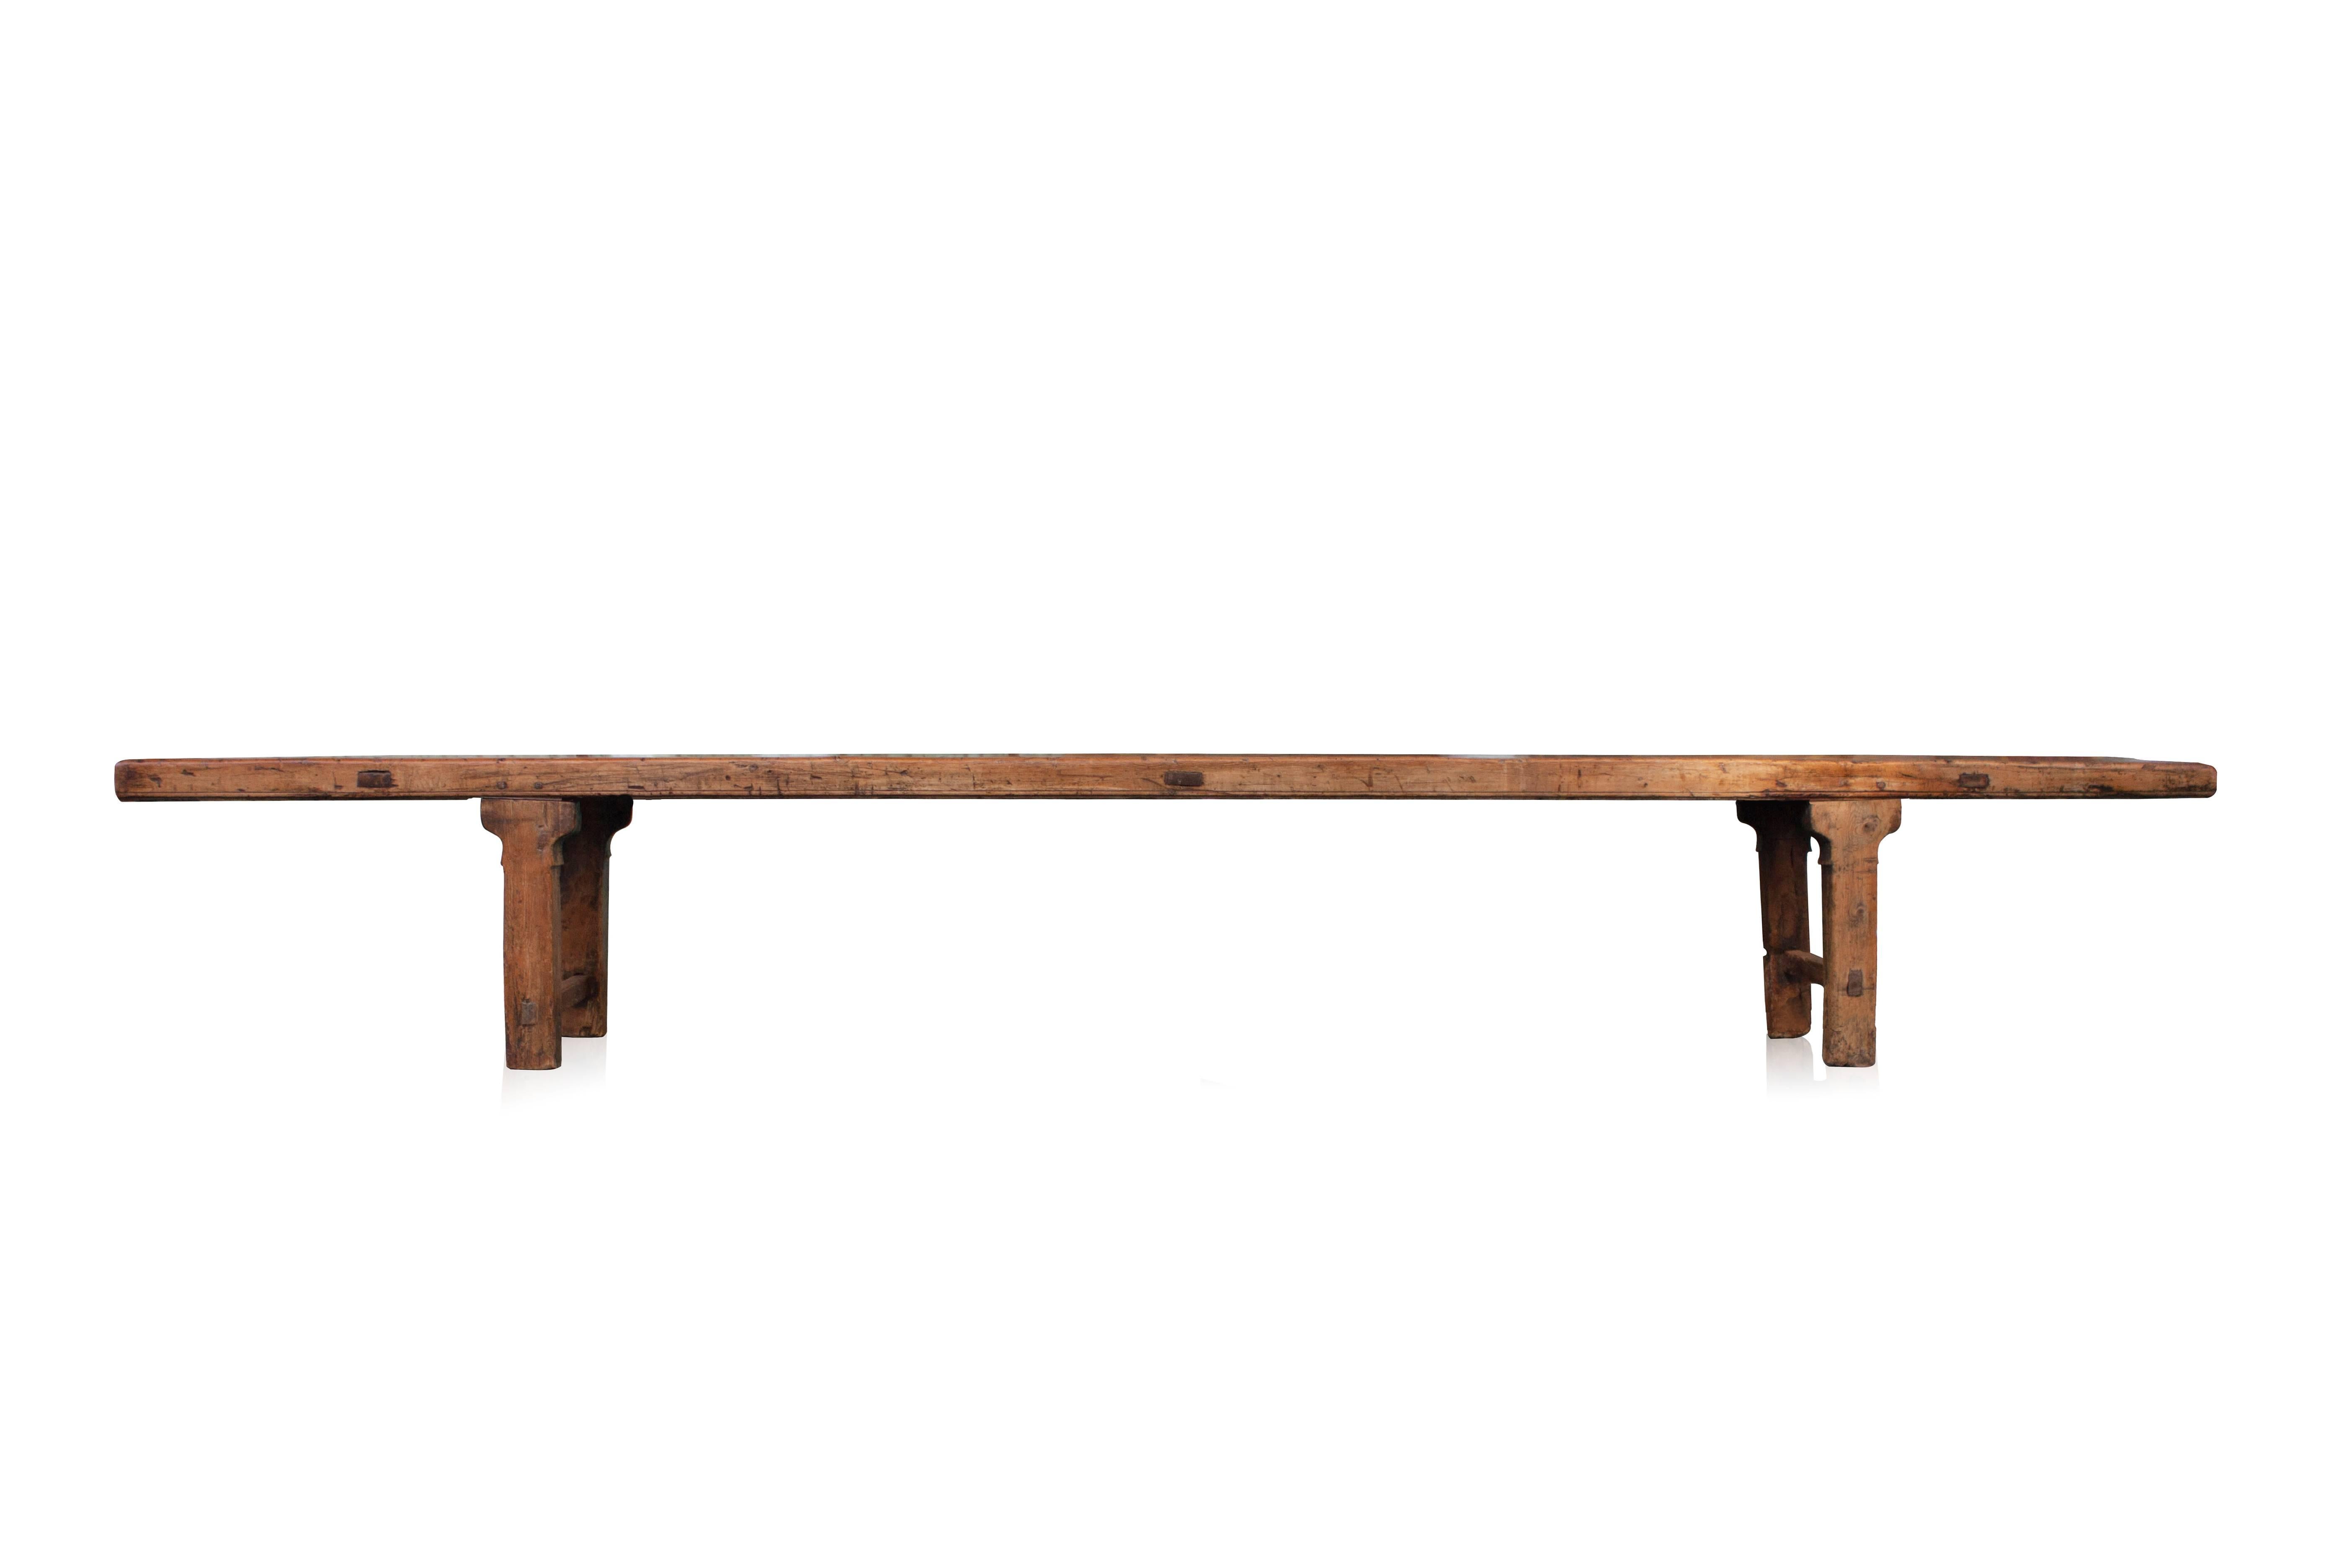 Huge Oak Primitive dining table.
Campaign Minimalist farm table.
This 5.5 m long table accomodates up to 18 people.
Stunning piece, 17th century Andorra, Spain.
Previously owned by Axel Vervoordt.
L 550 cm H 78 cm D 60 cm.